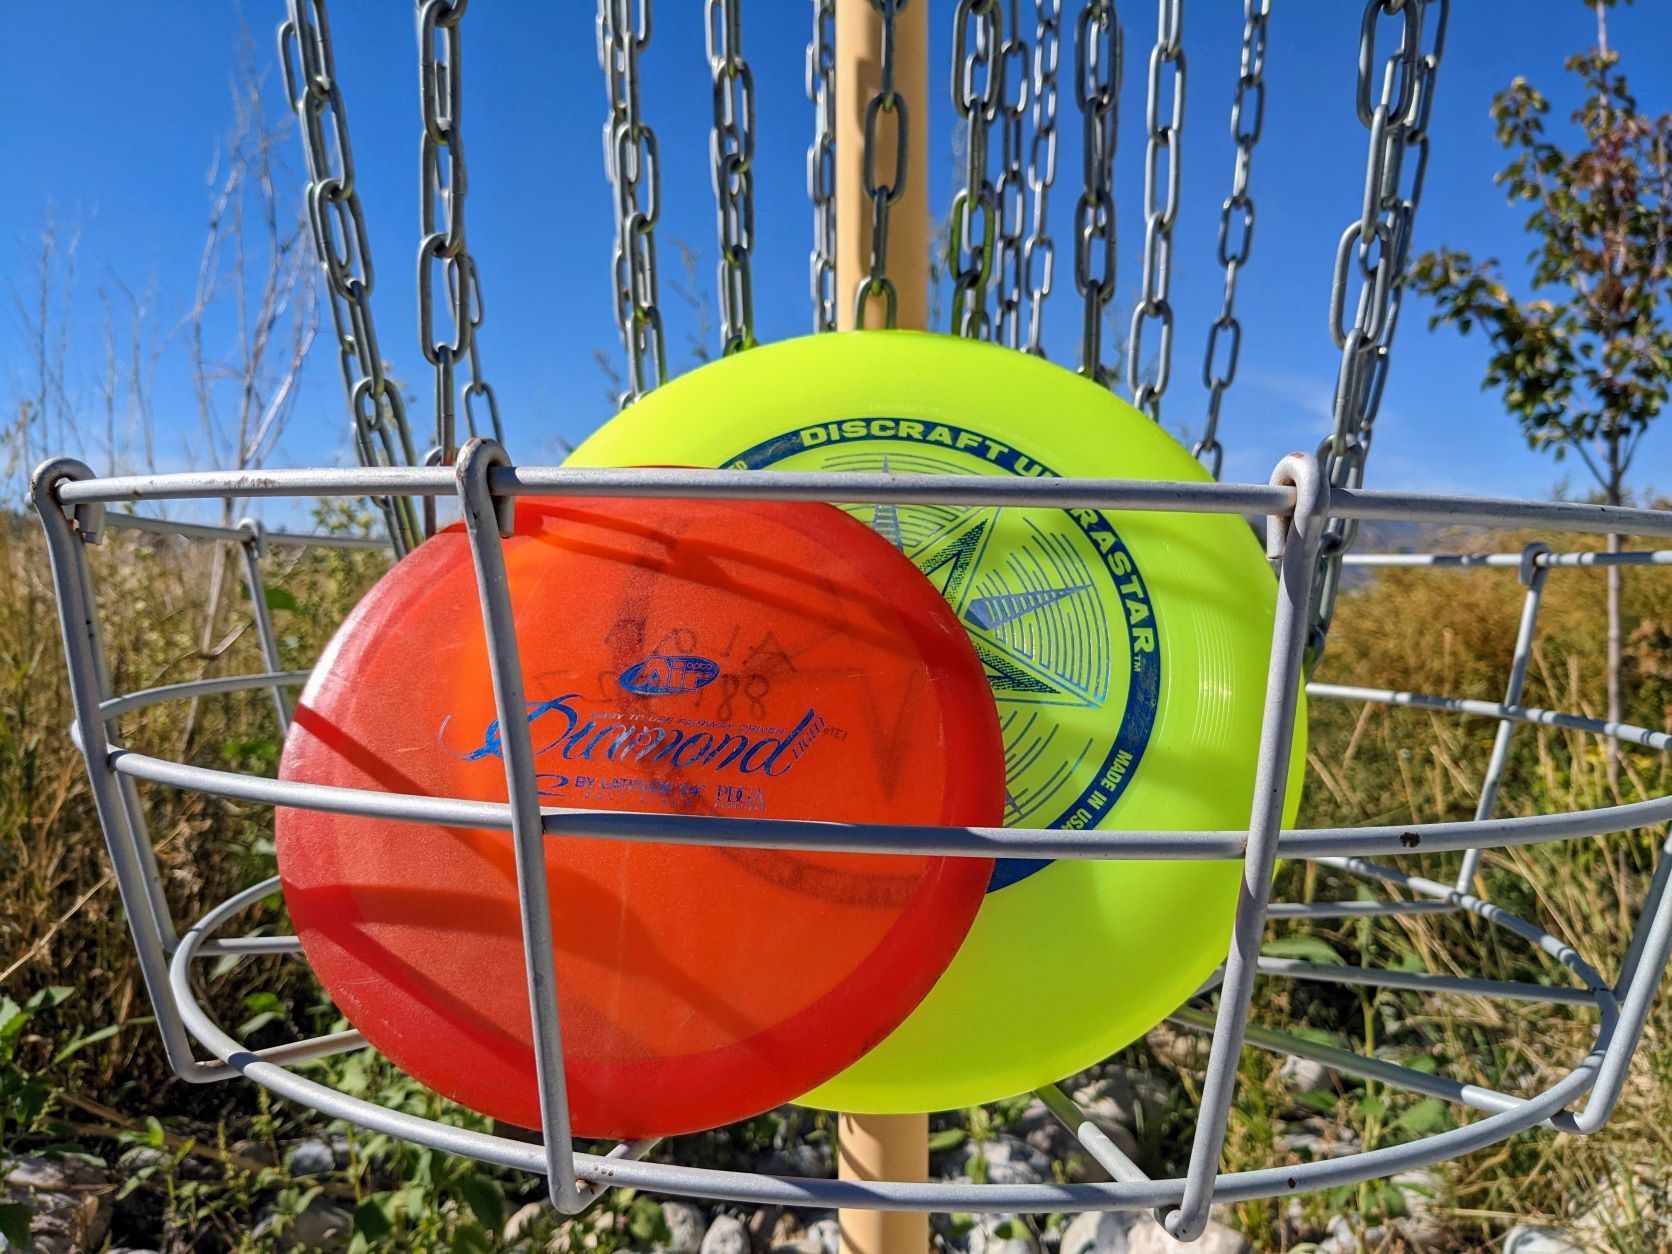 Ultimate Frisbee in a disc golf basket